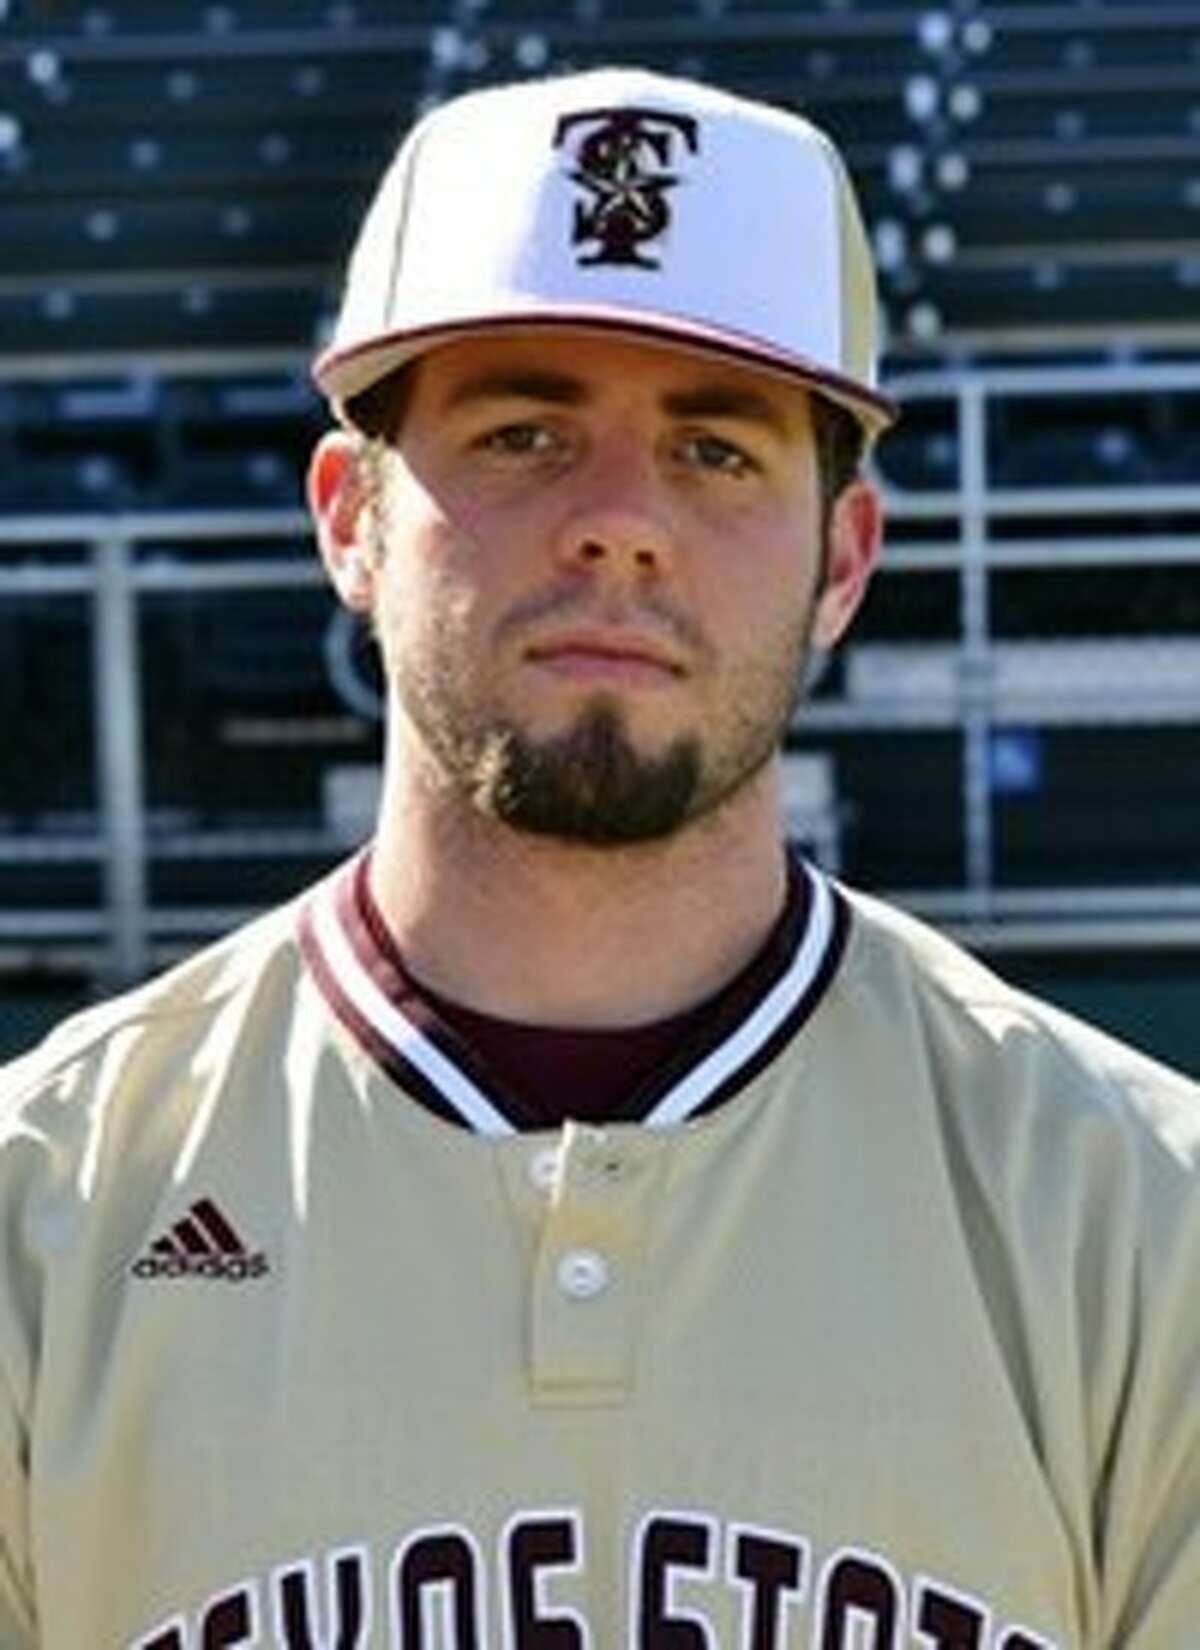 Seven Lakes graduate Donnie Hart was selected out of Texas State University in the 27th round of the Major League Baseball Draft by the Baltimore Orioles.